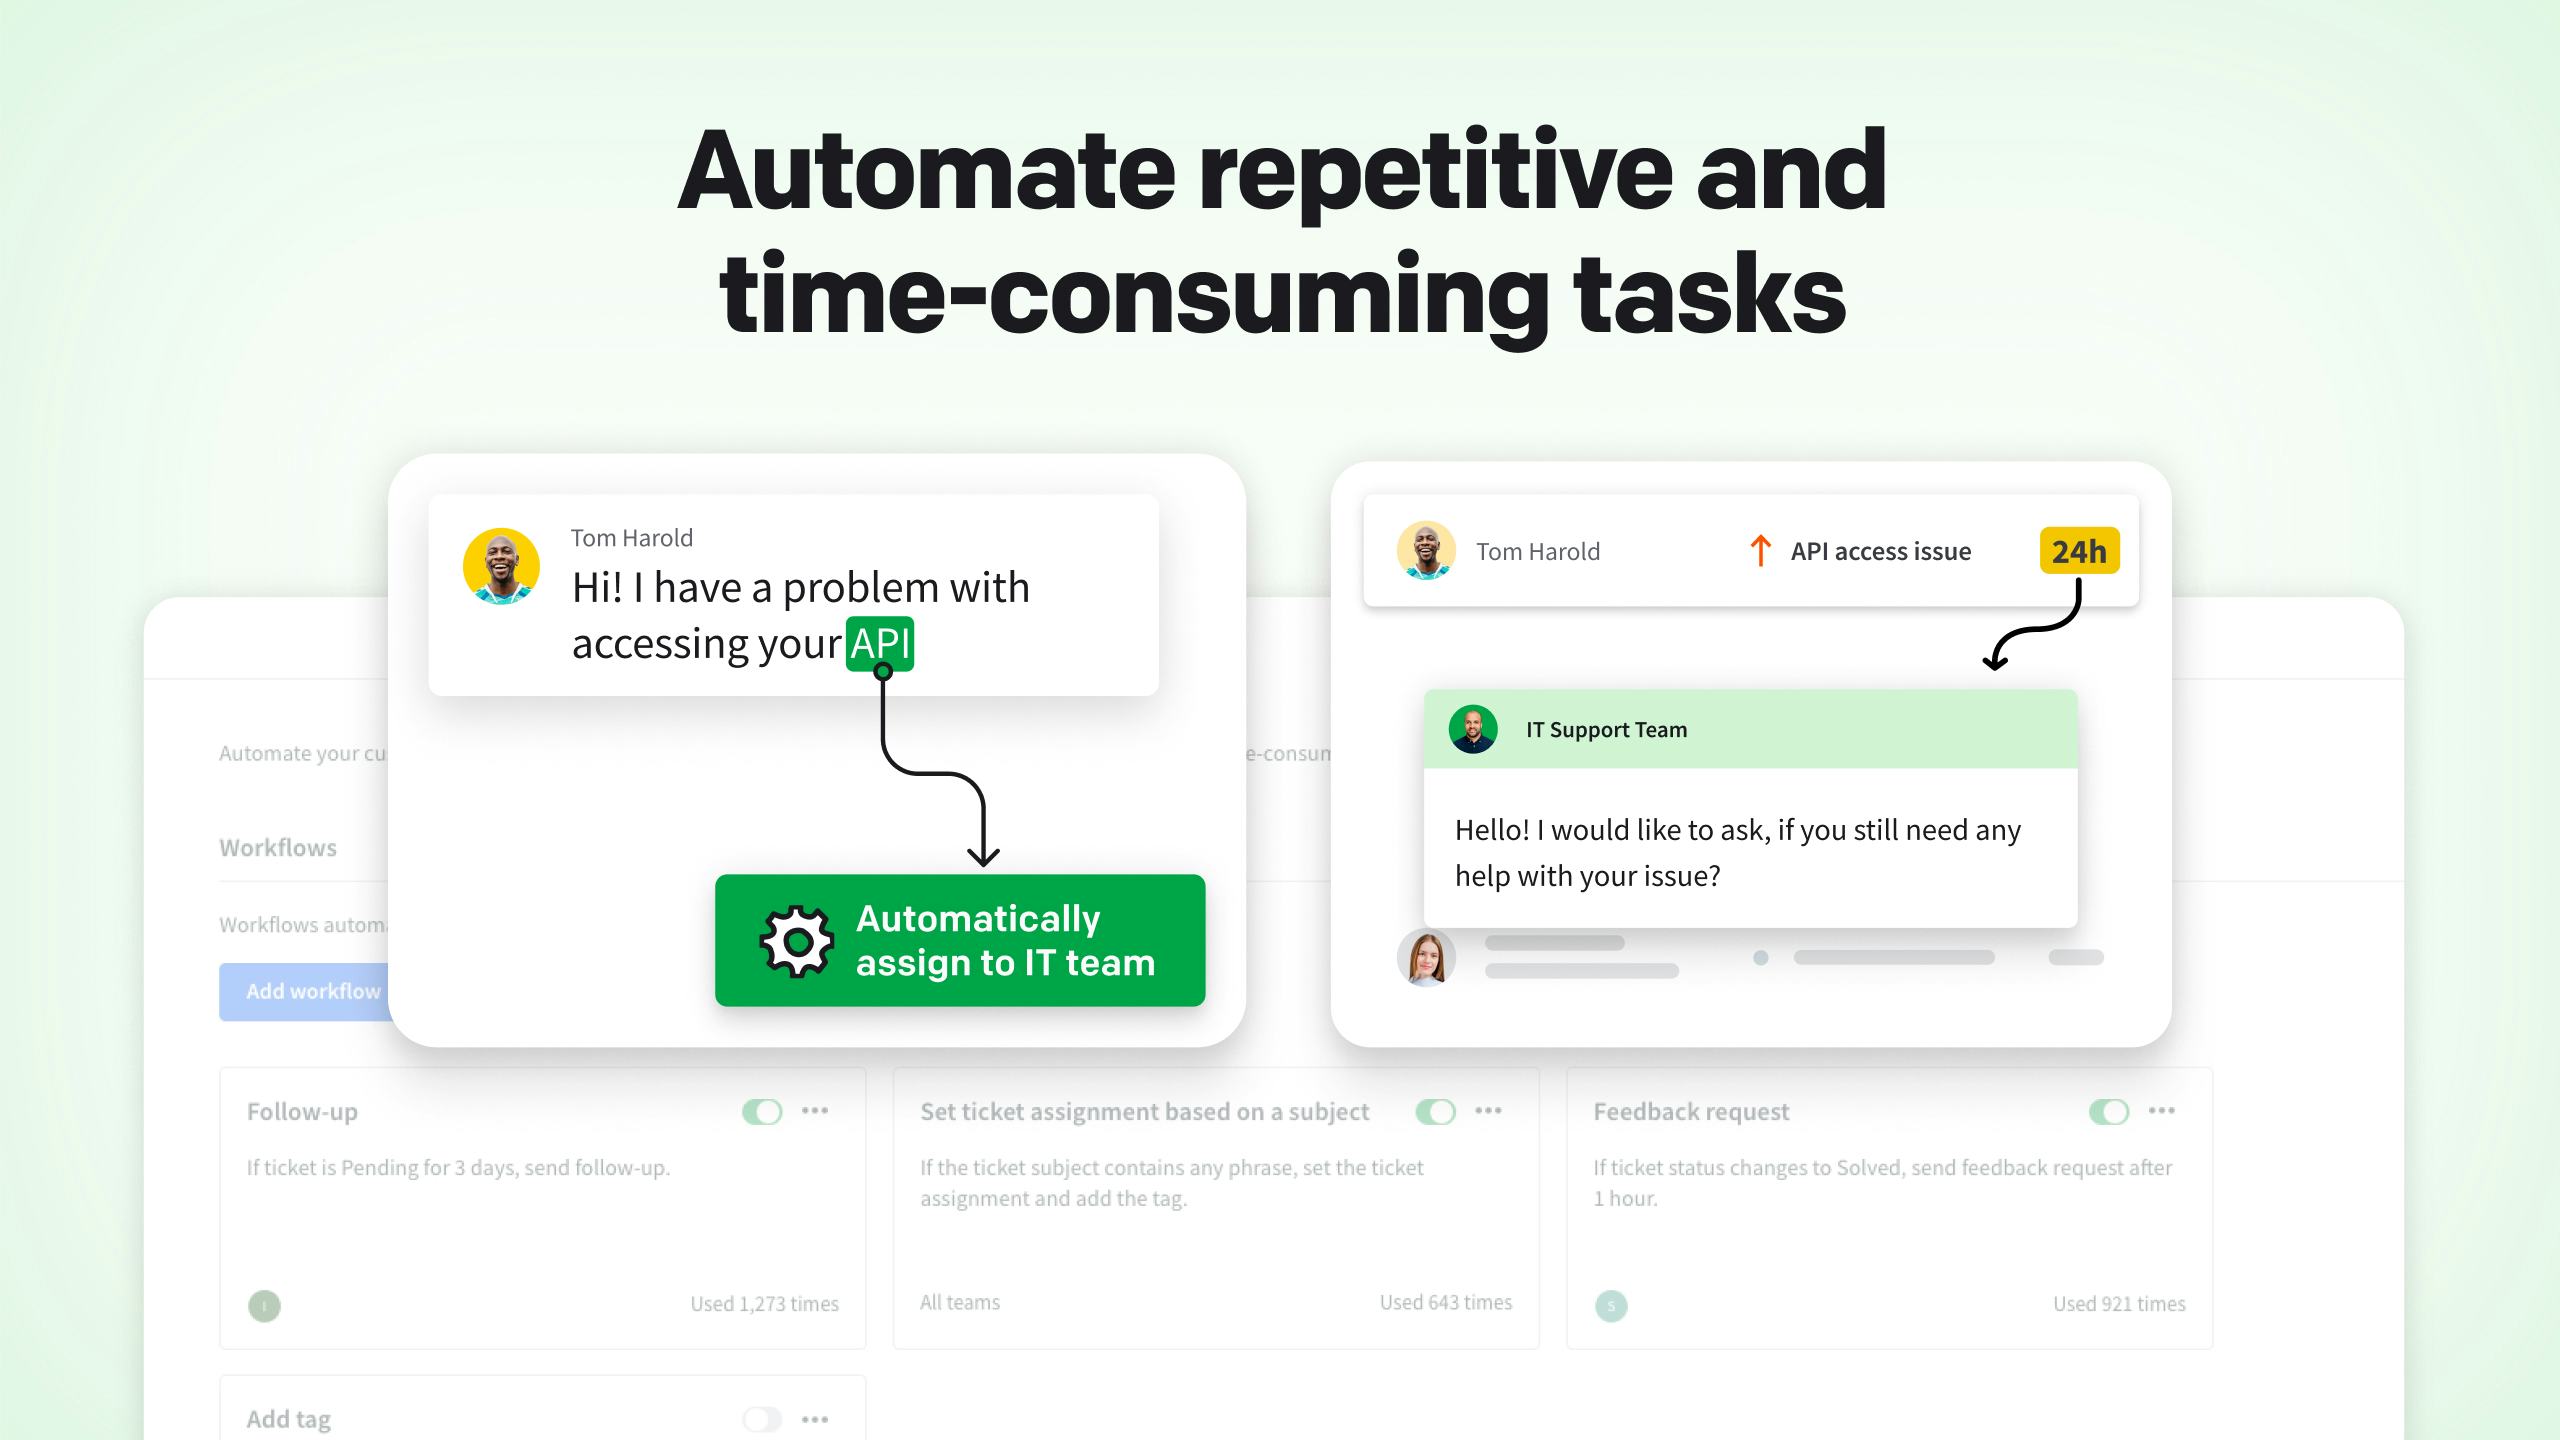 HelpDesk Software - Automate repetitive and time-consuming tasks